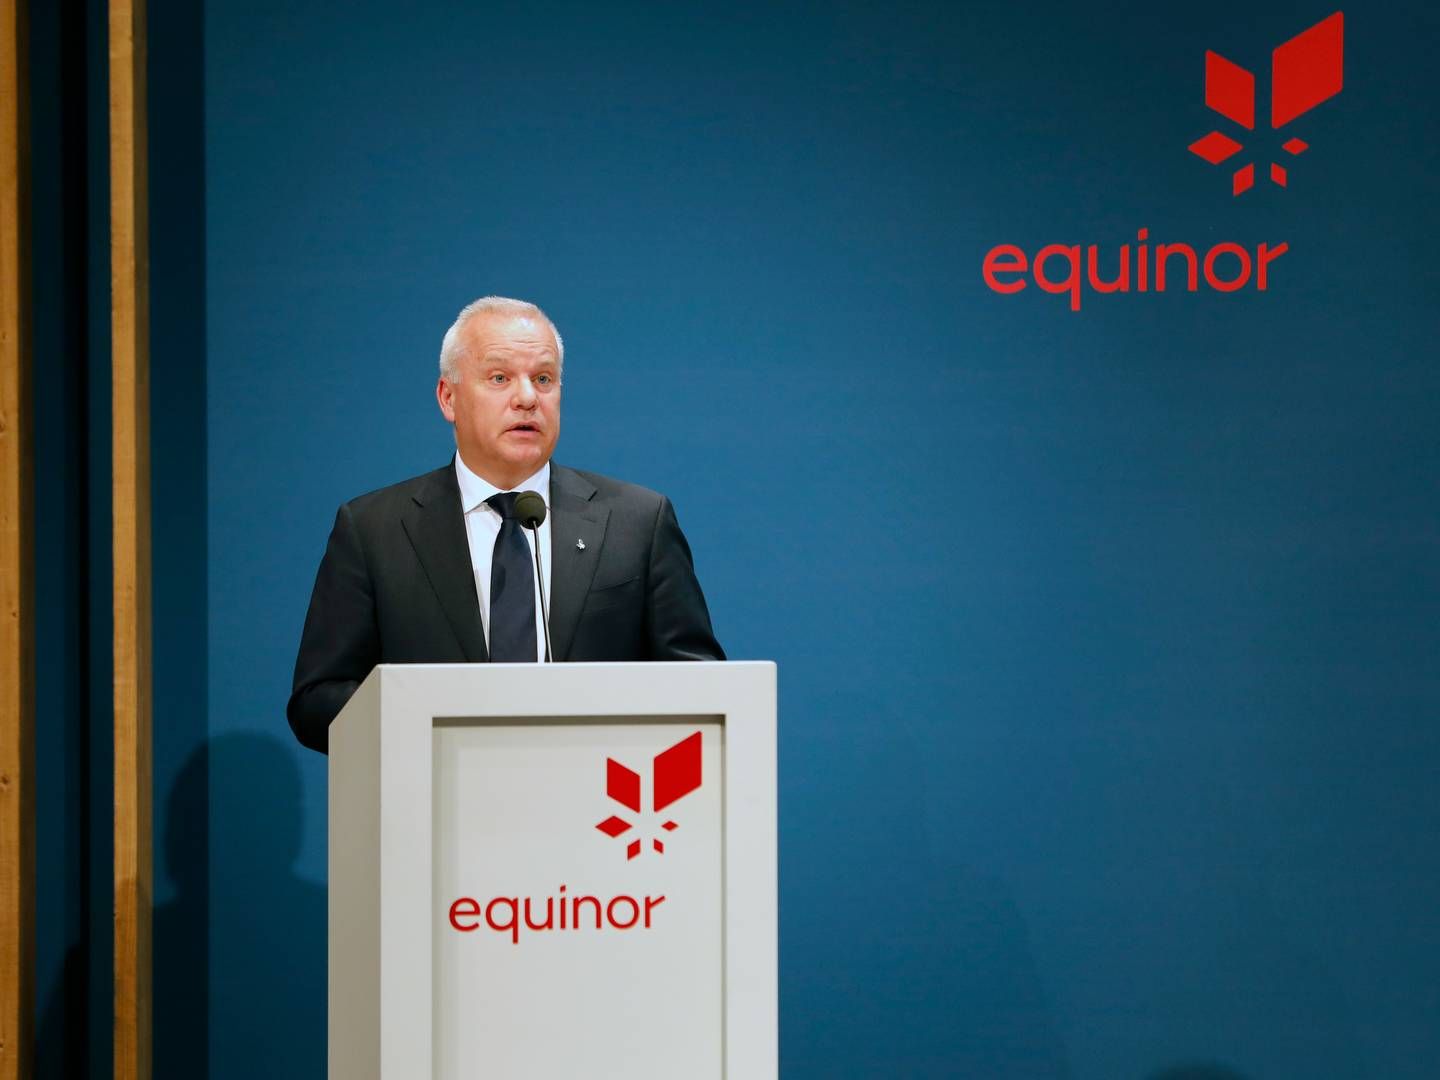 Anders Opedal, CEO, Equinor. | Photo: Equinor